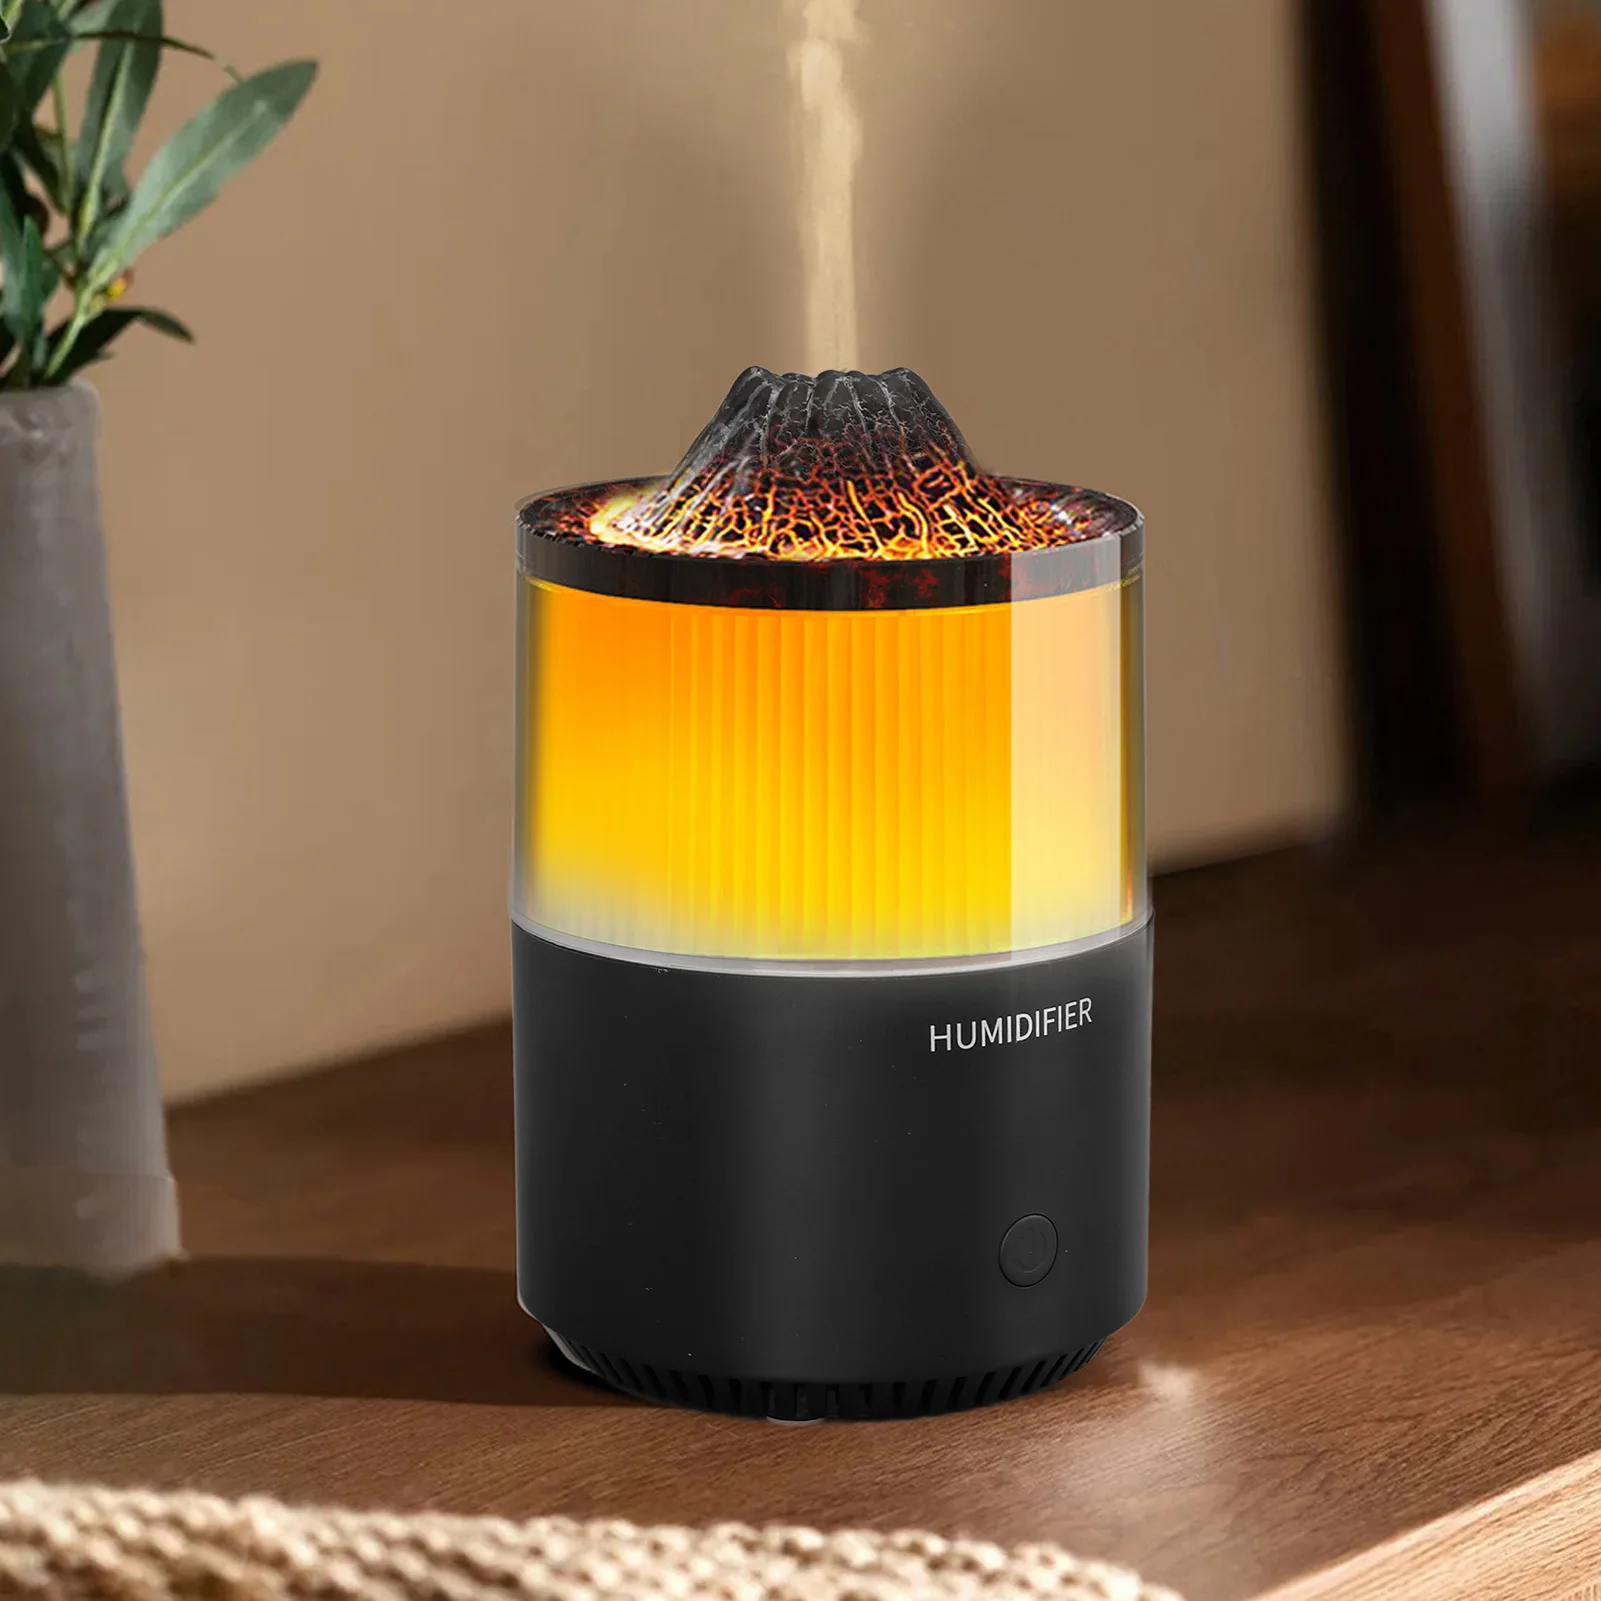 

Essential Oil Diffuser Humidifier Simulation Volcano 200ml with Colorful Light Low Noise Desktop Humidifier for Home